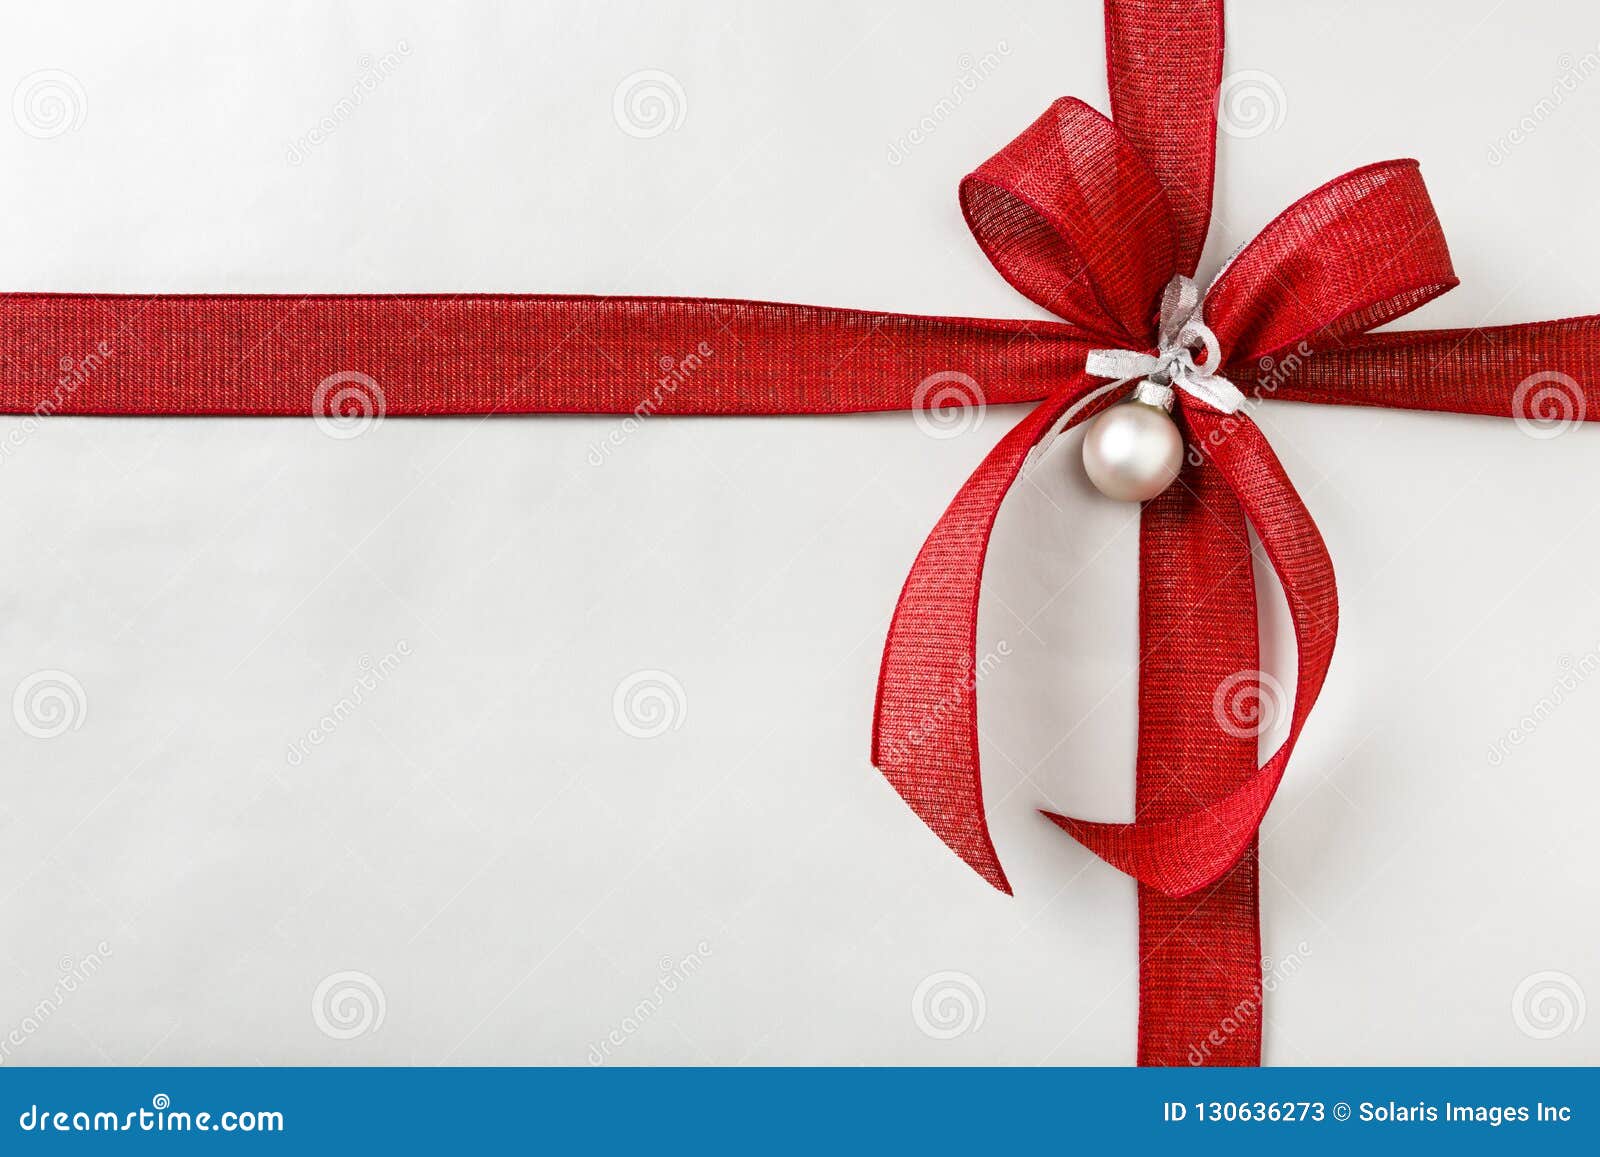 beautiful christmas gift present with bright red bow and silver wrapping paper background border